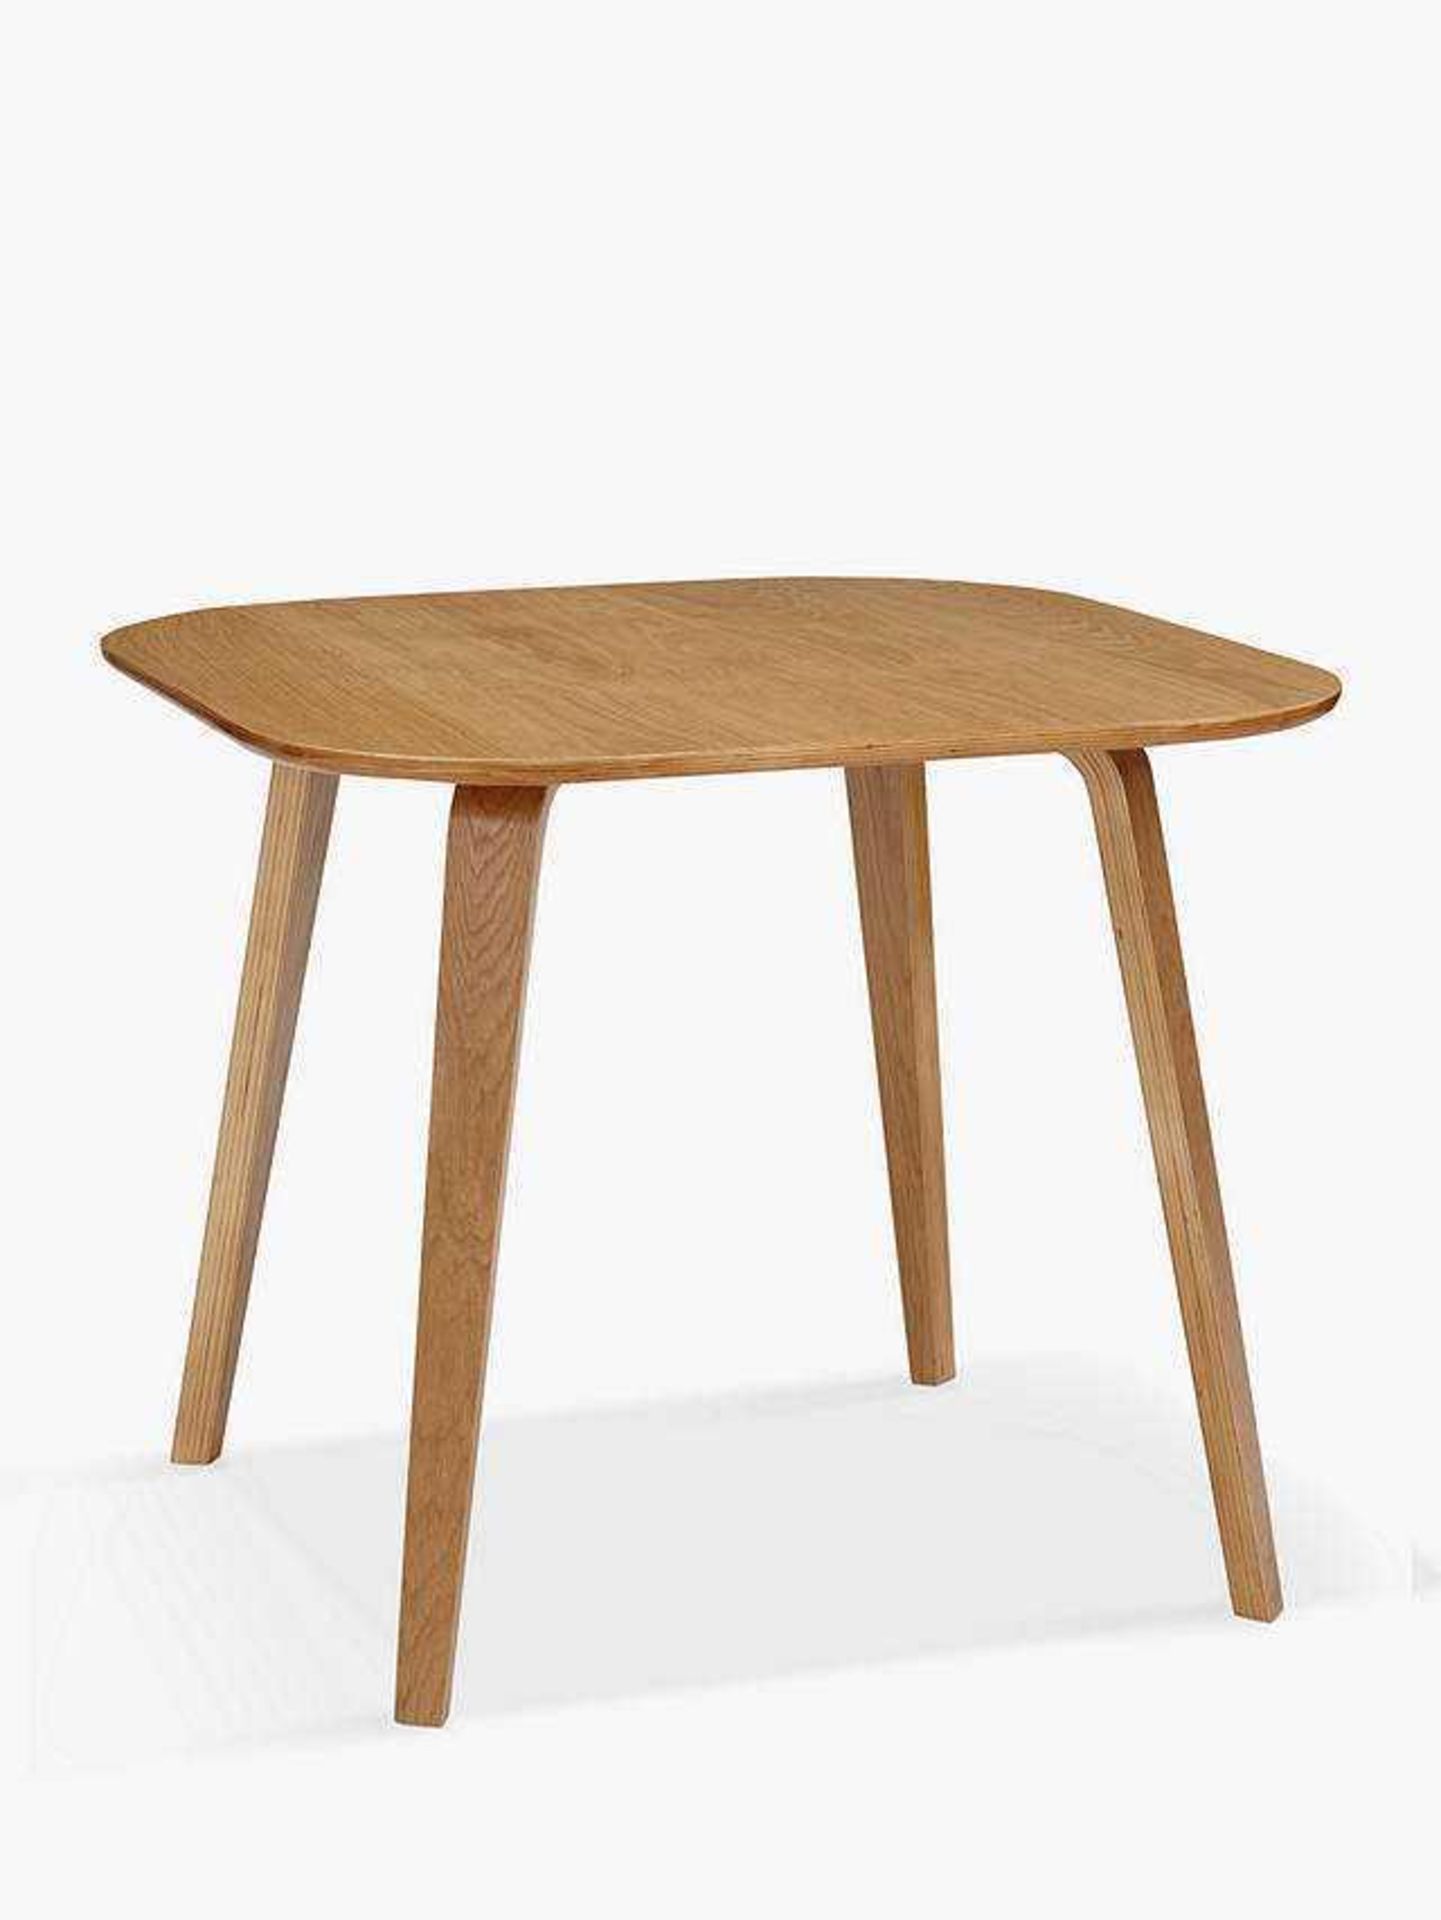 (Dd) RRP £200 Lot To Contain 1 John Lewis Anton Dining Table - 4 Person